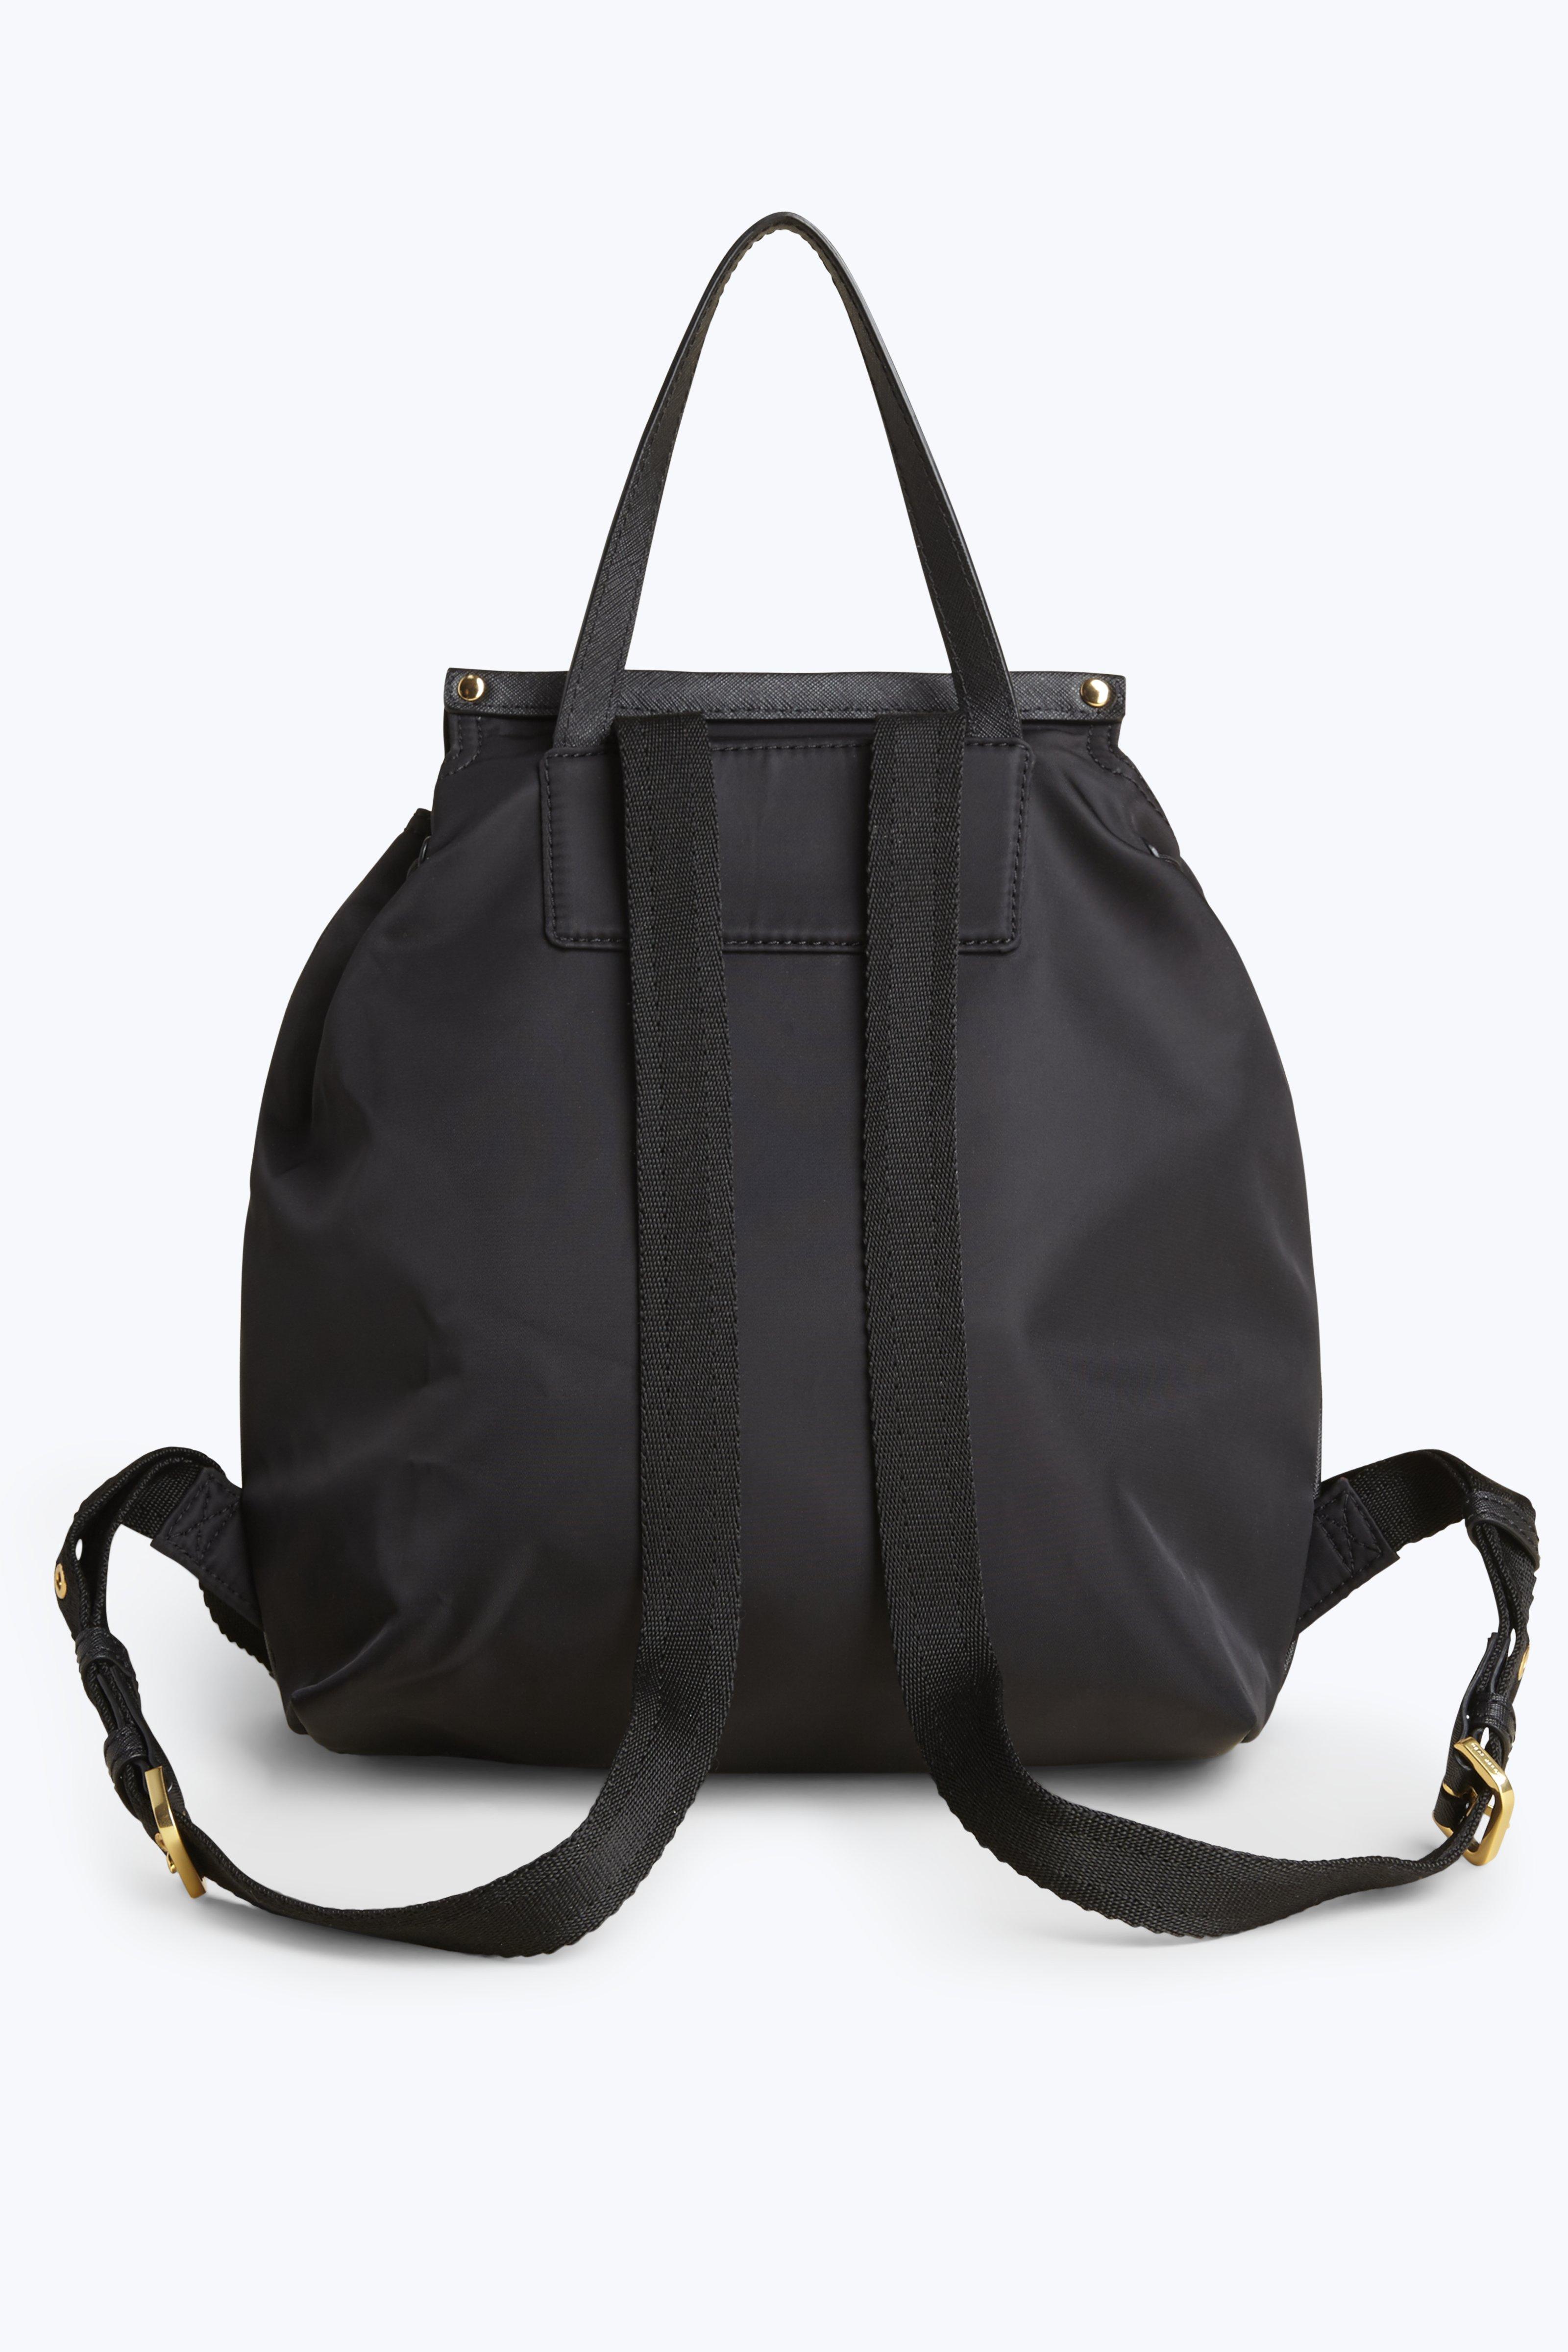 MARC JACOBS Trooper Nylon Flap Backpack, Army in Black | ModeSens